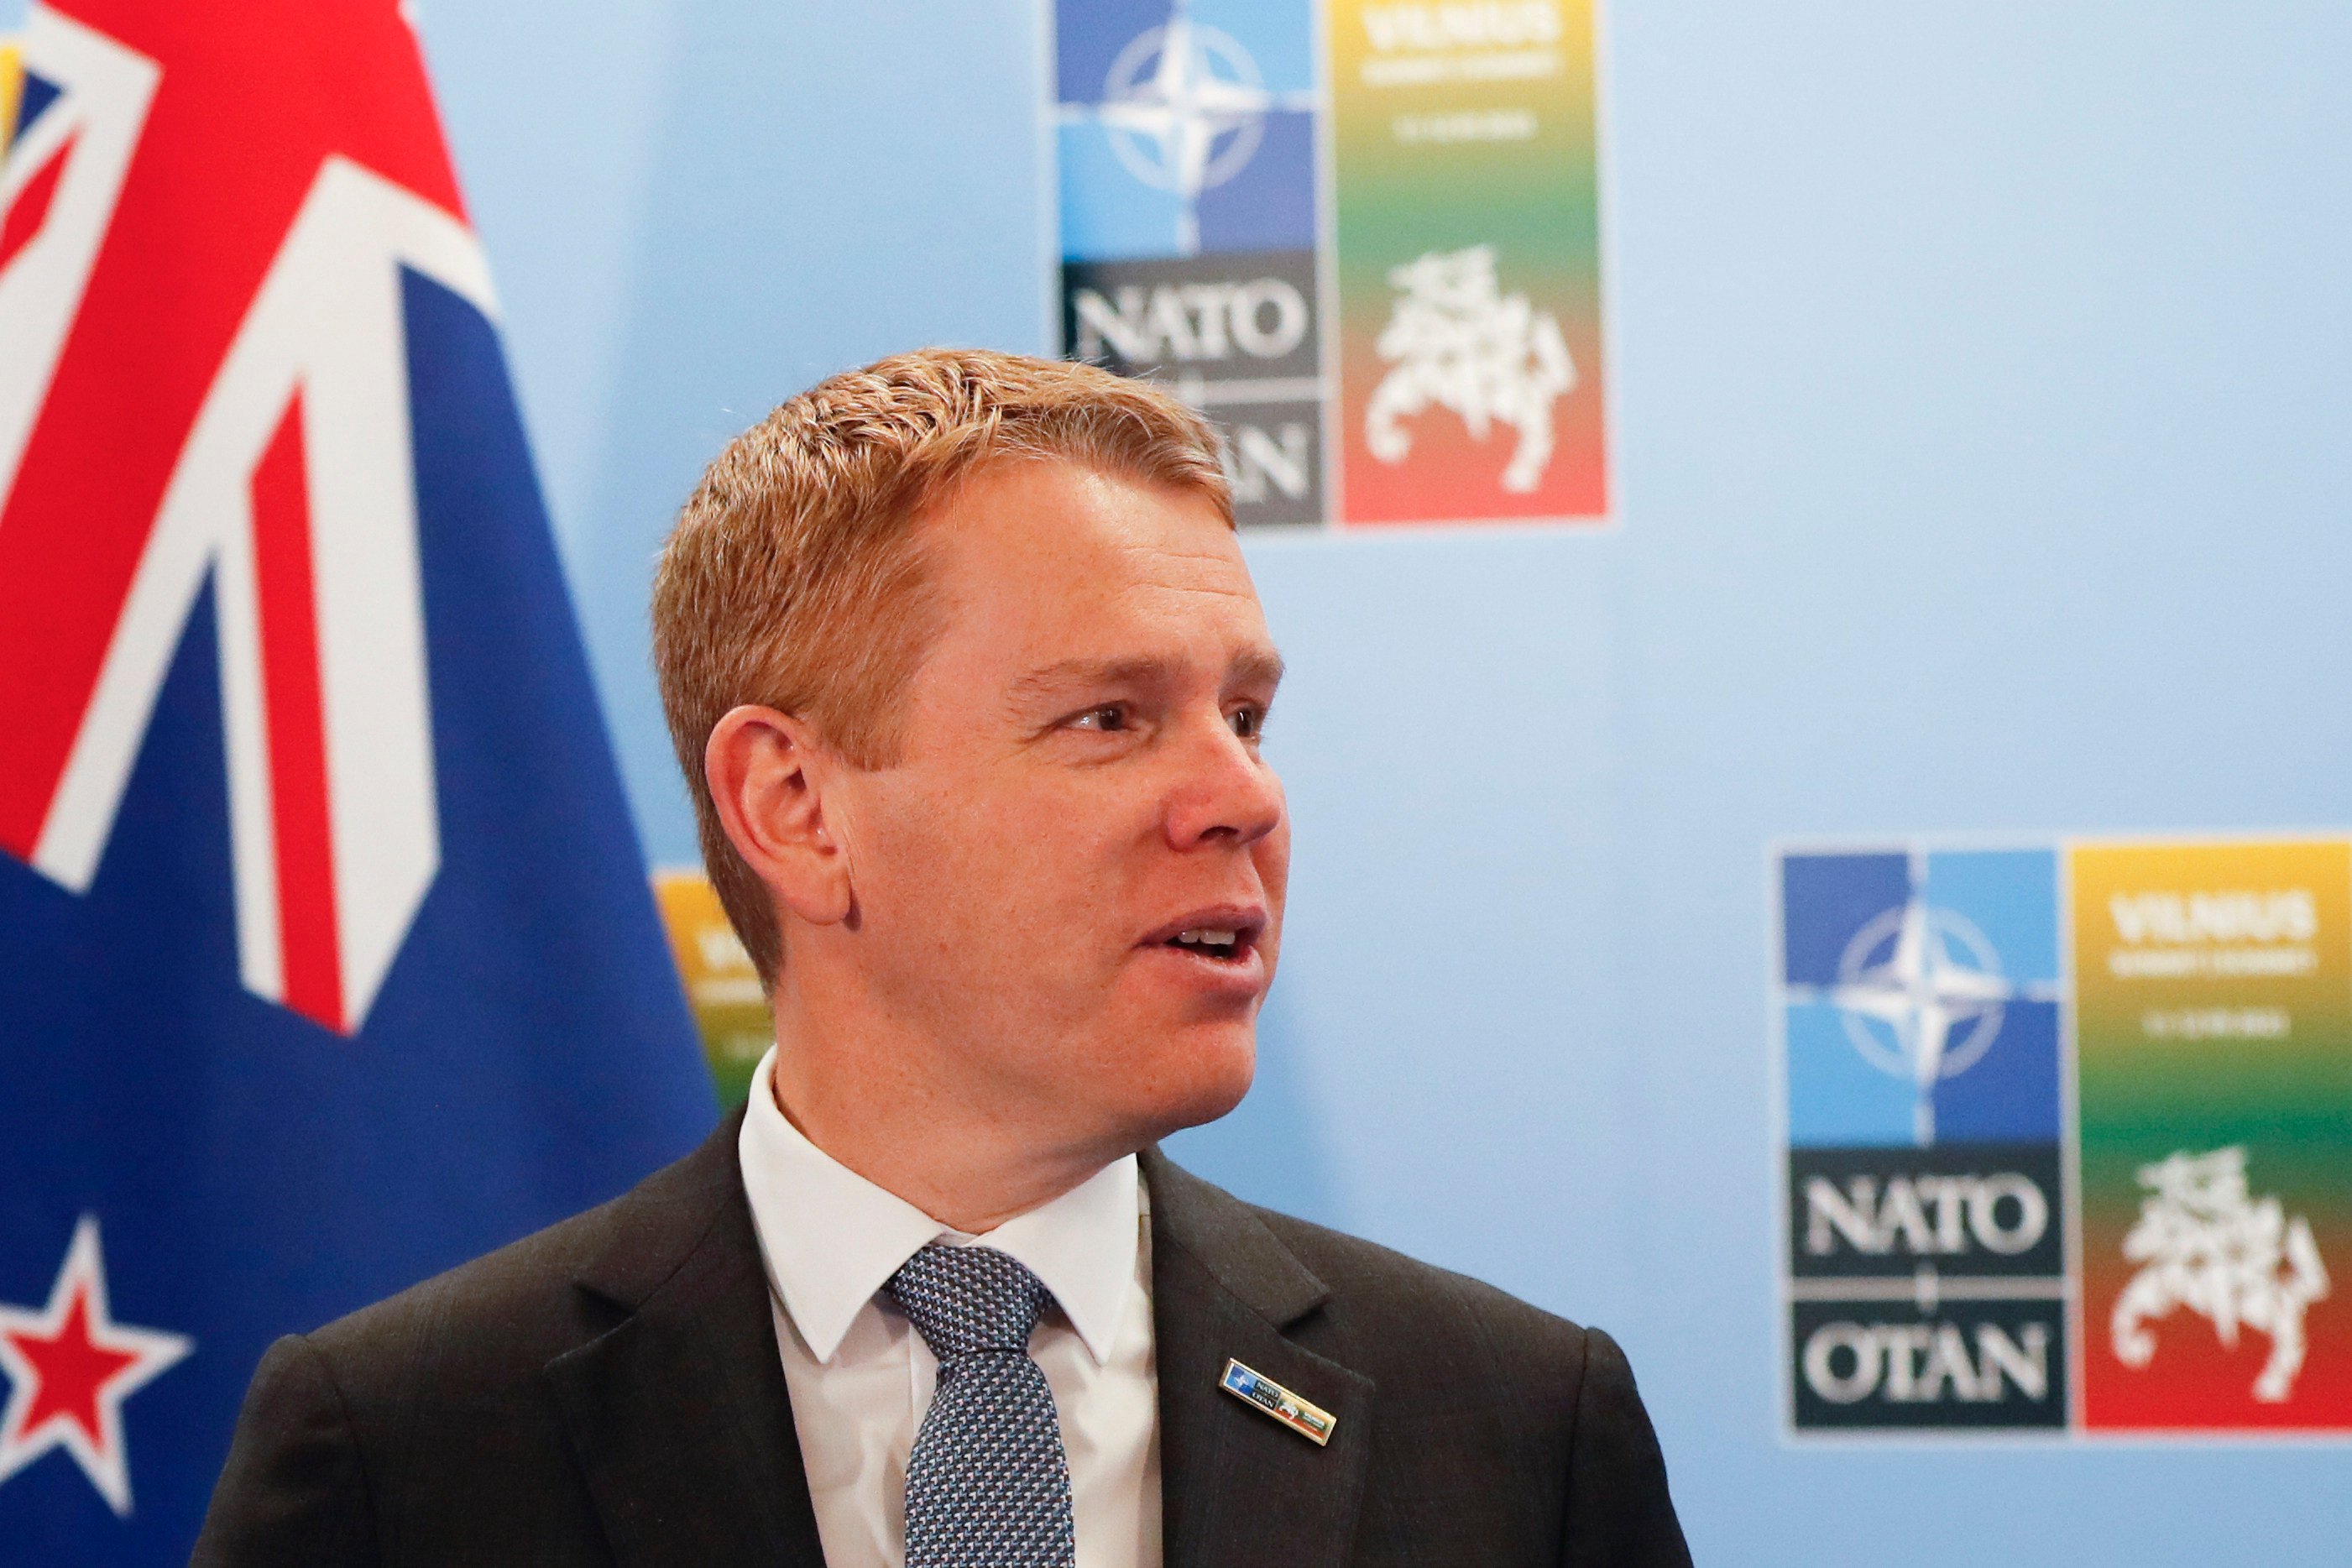 New Zealand Prime Minister Chris Hipkins said that the Pacific region less secure due to China’s assertiveness. Photo: AP